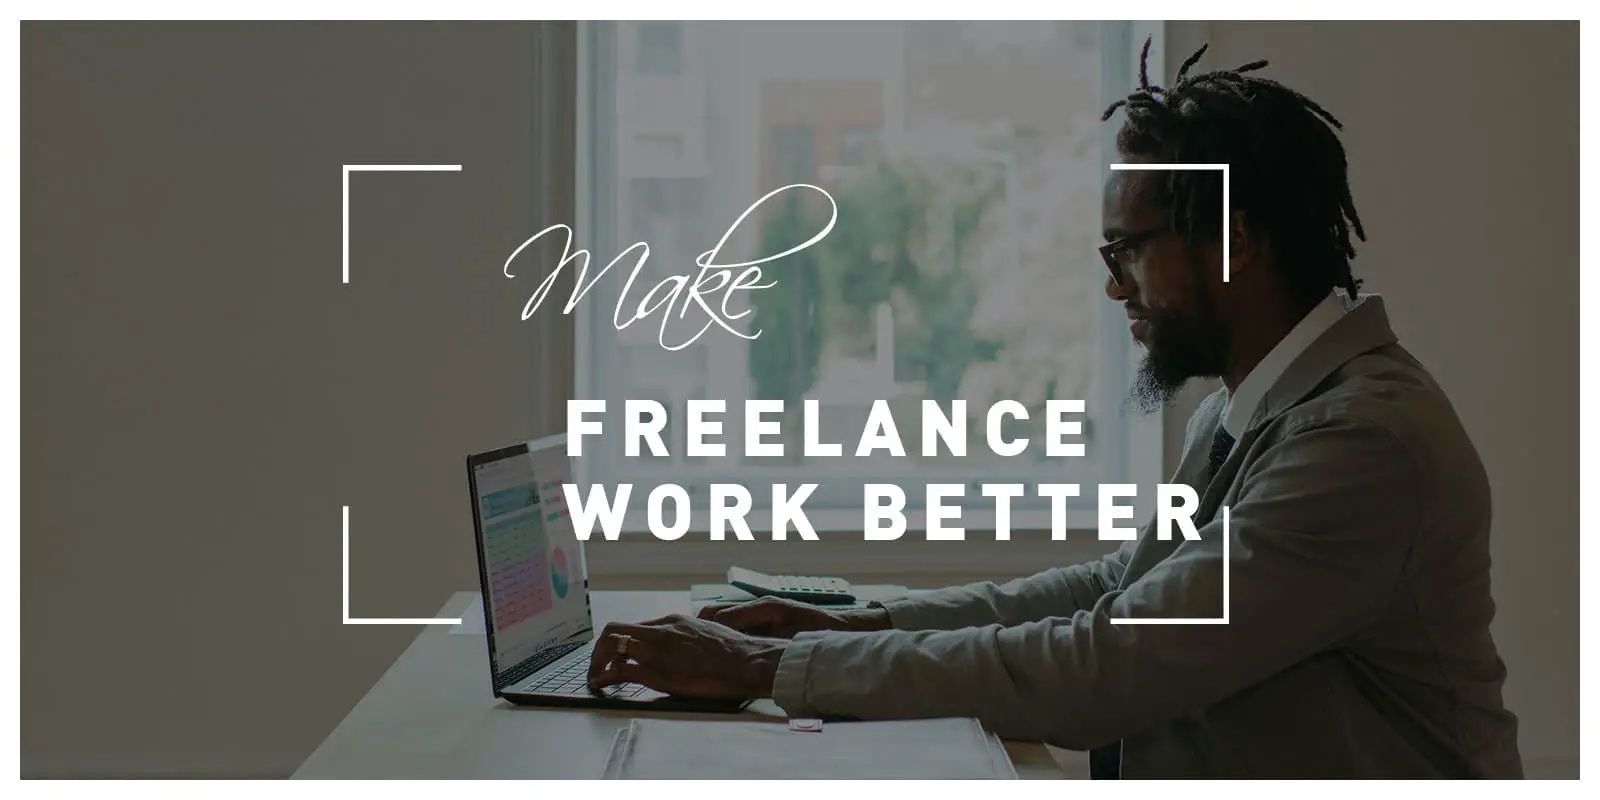 5 Apps to Make Freelance Work More Efficient